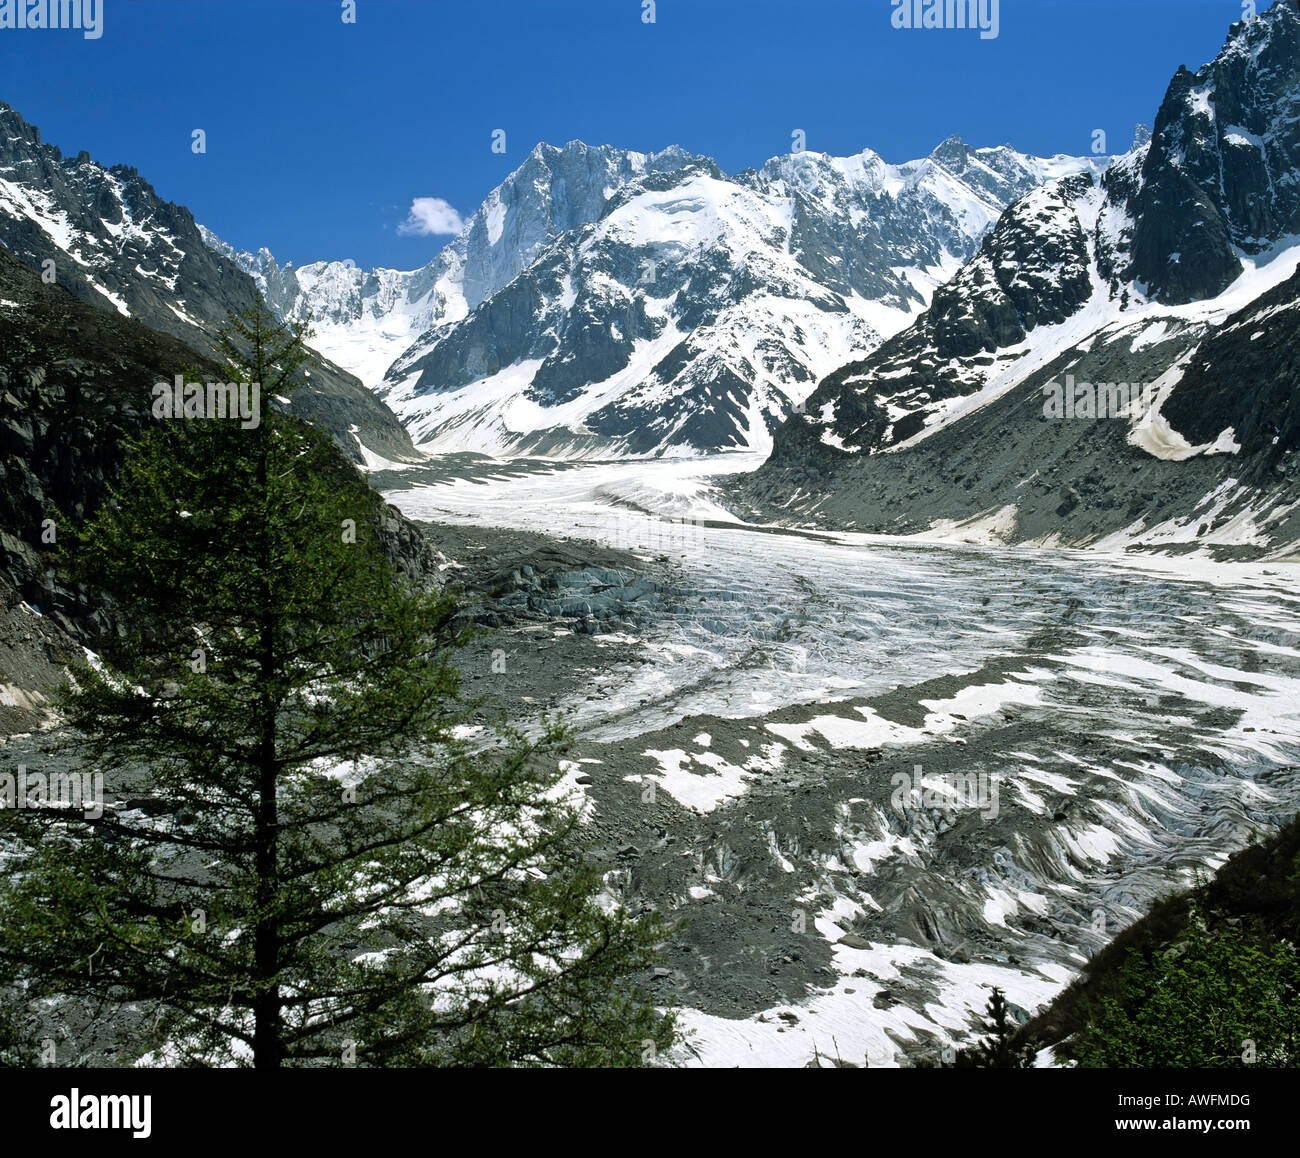 Mer de Glace Glacier viewed from Montenvers Lookout, Grand Jorasses, Savoy Alps, France, Europe Stock Photo